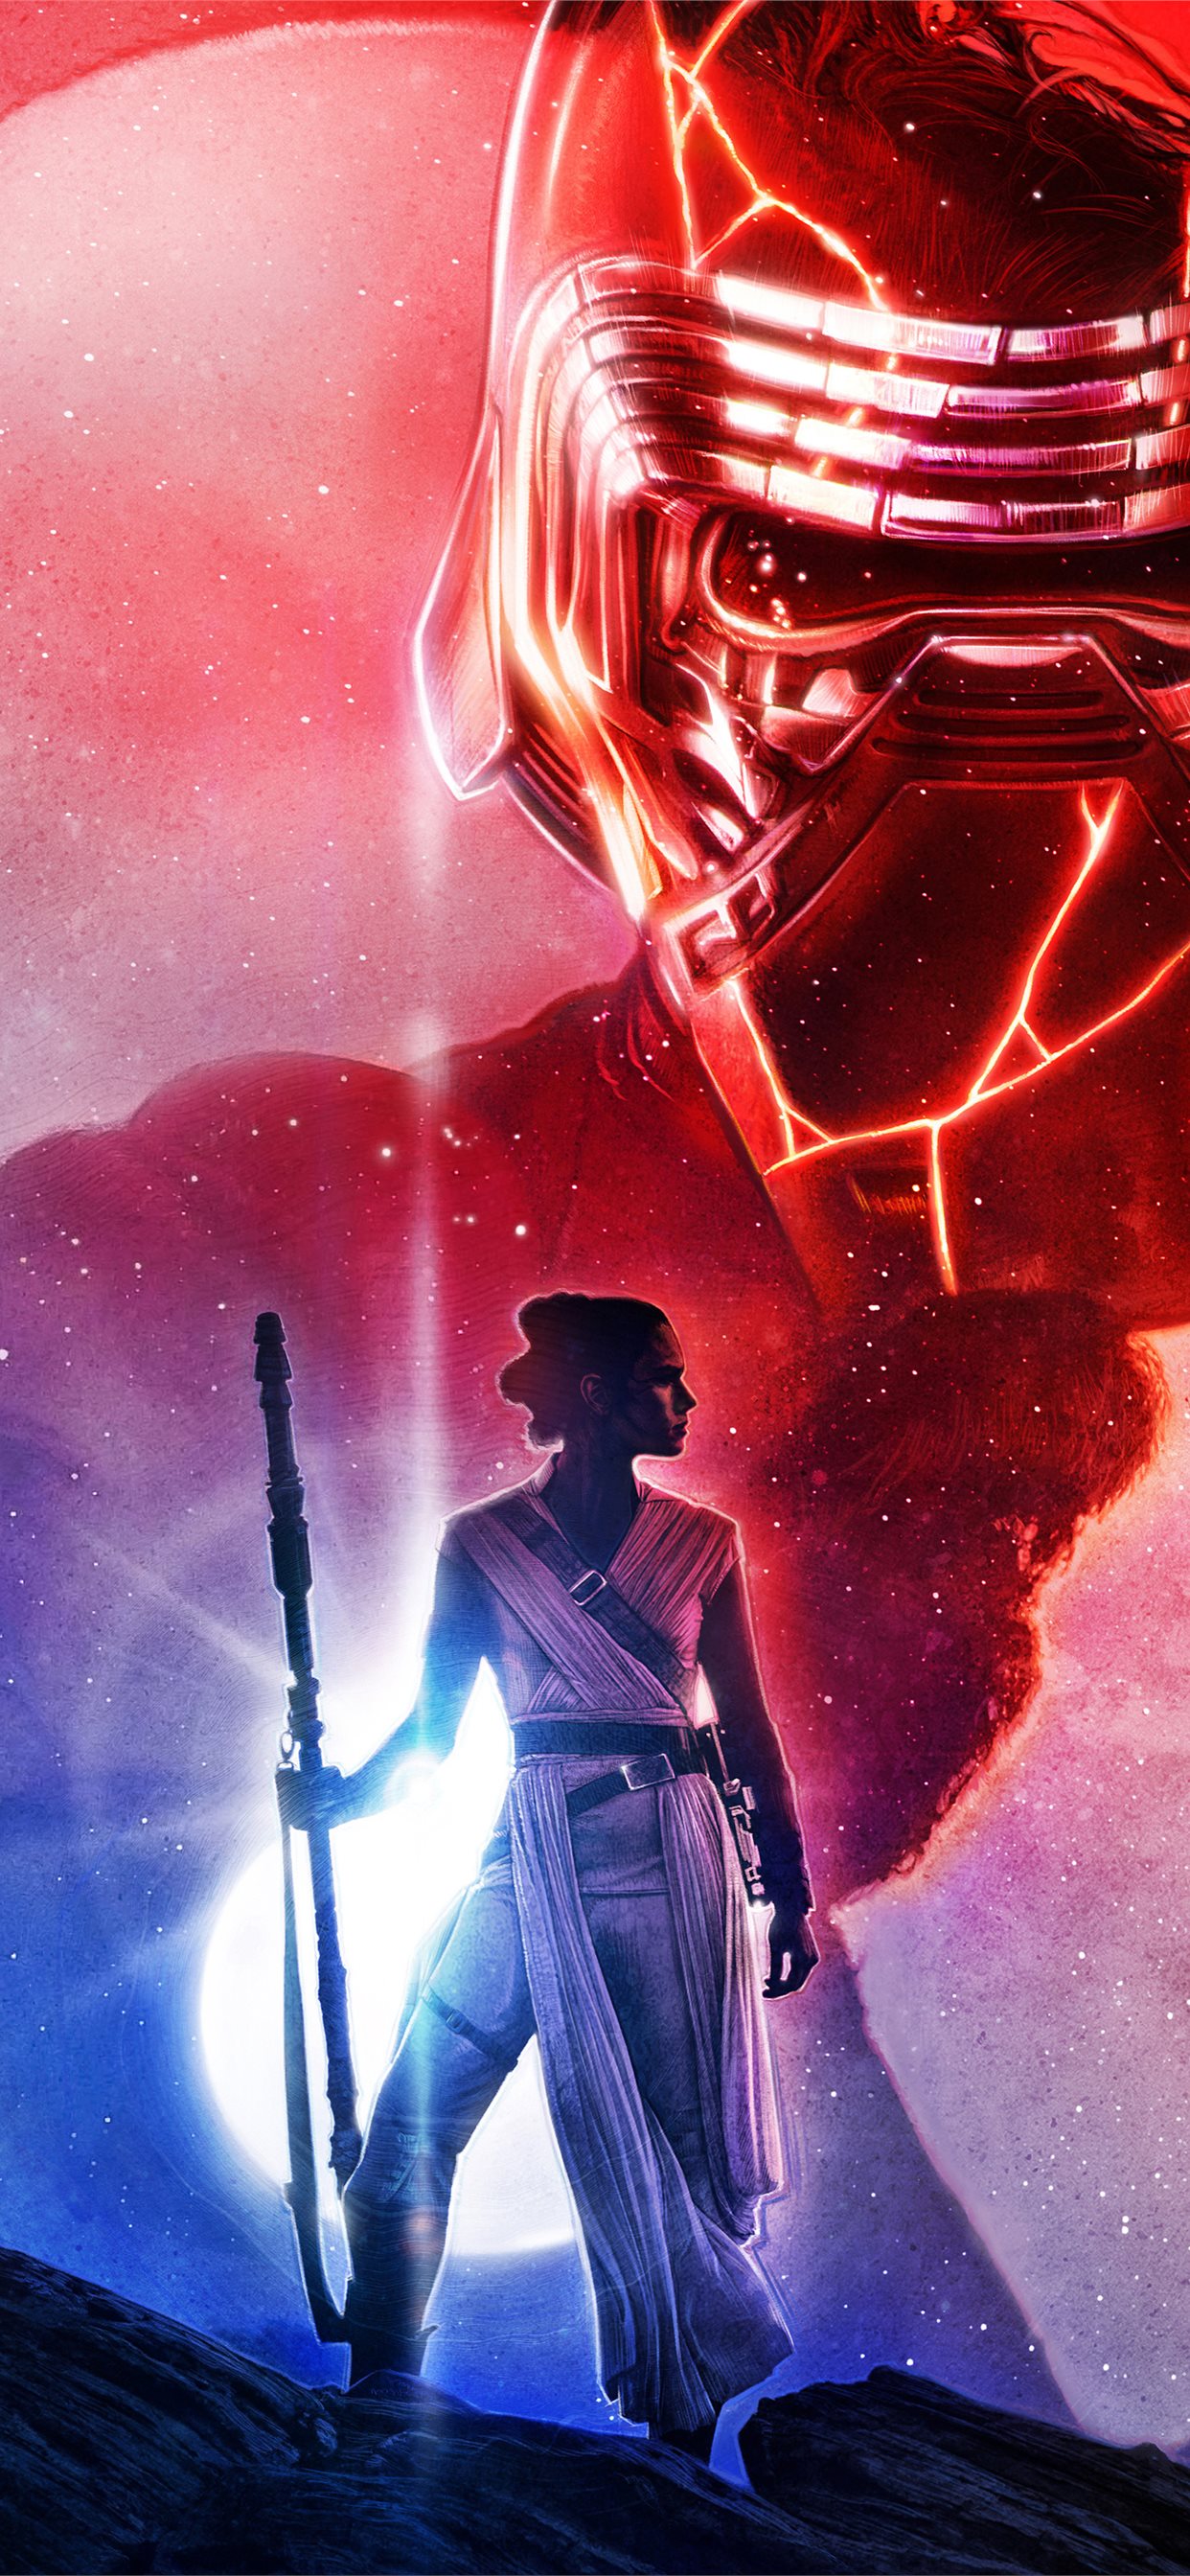 The Force Awakens Iphone Wallpapers